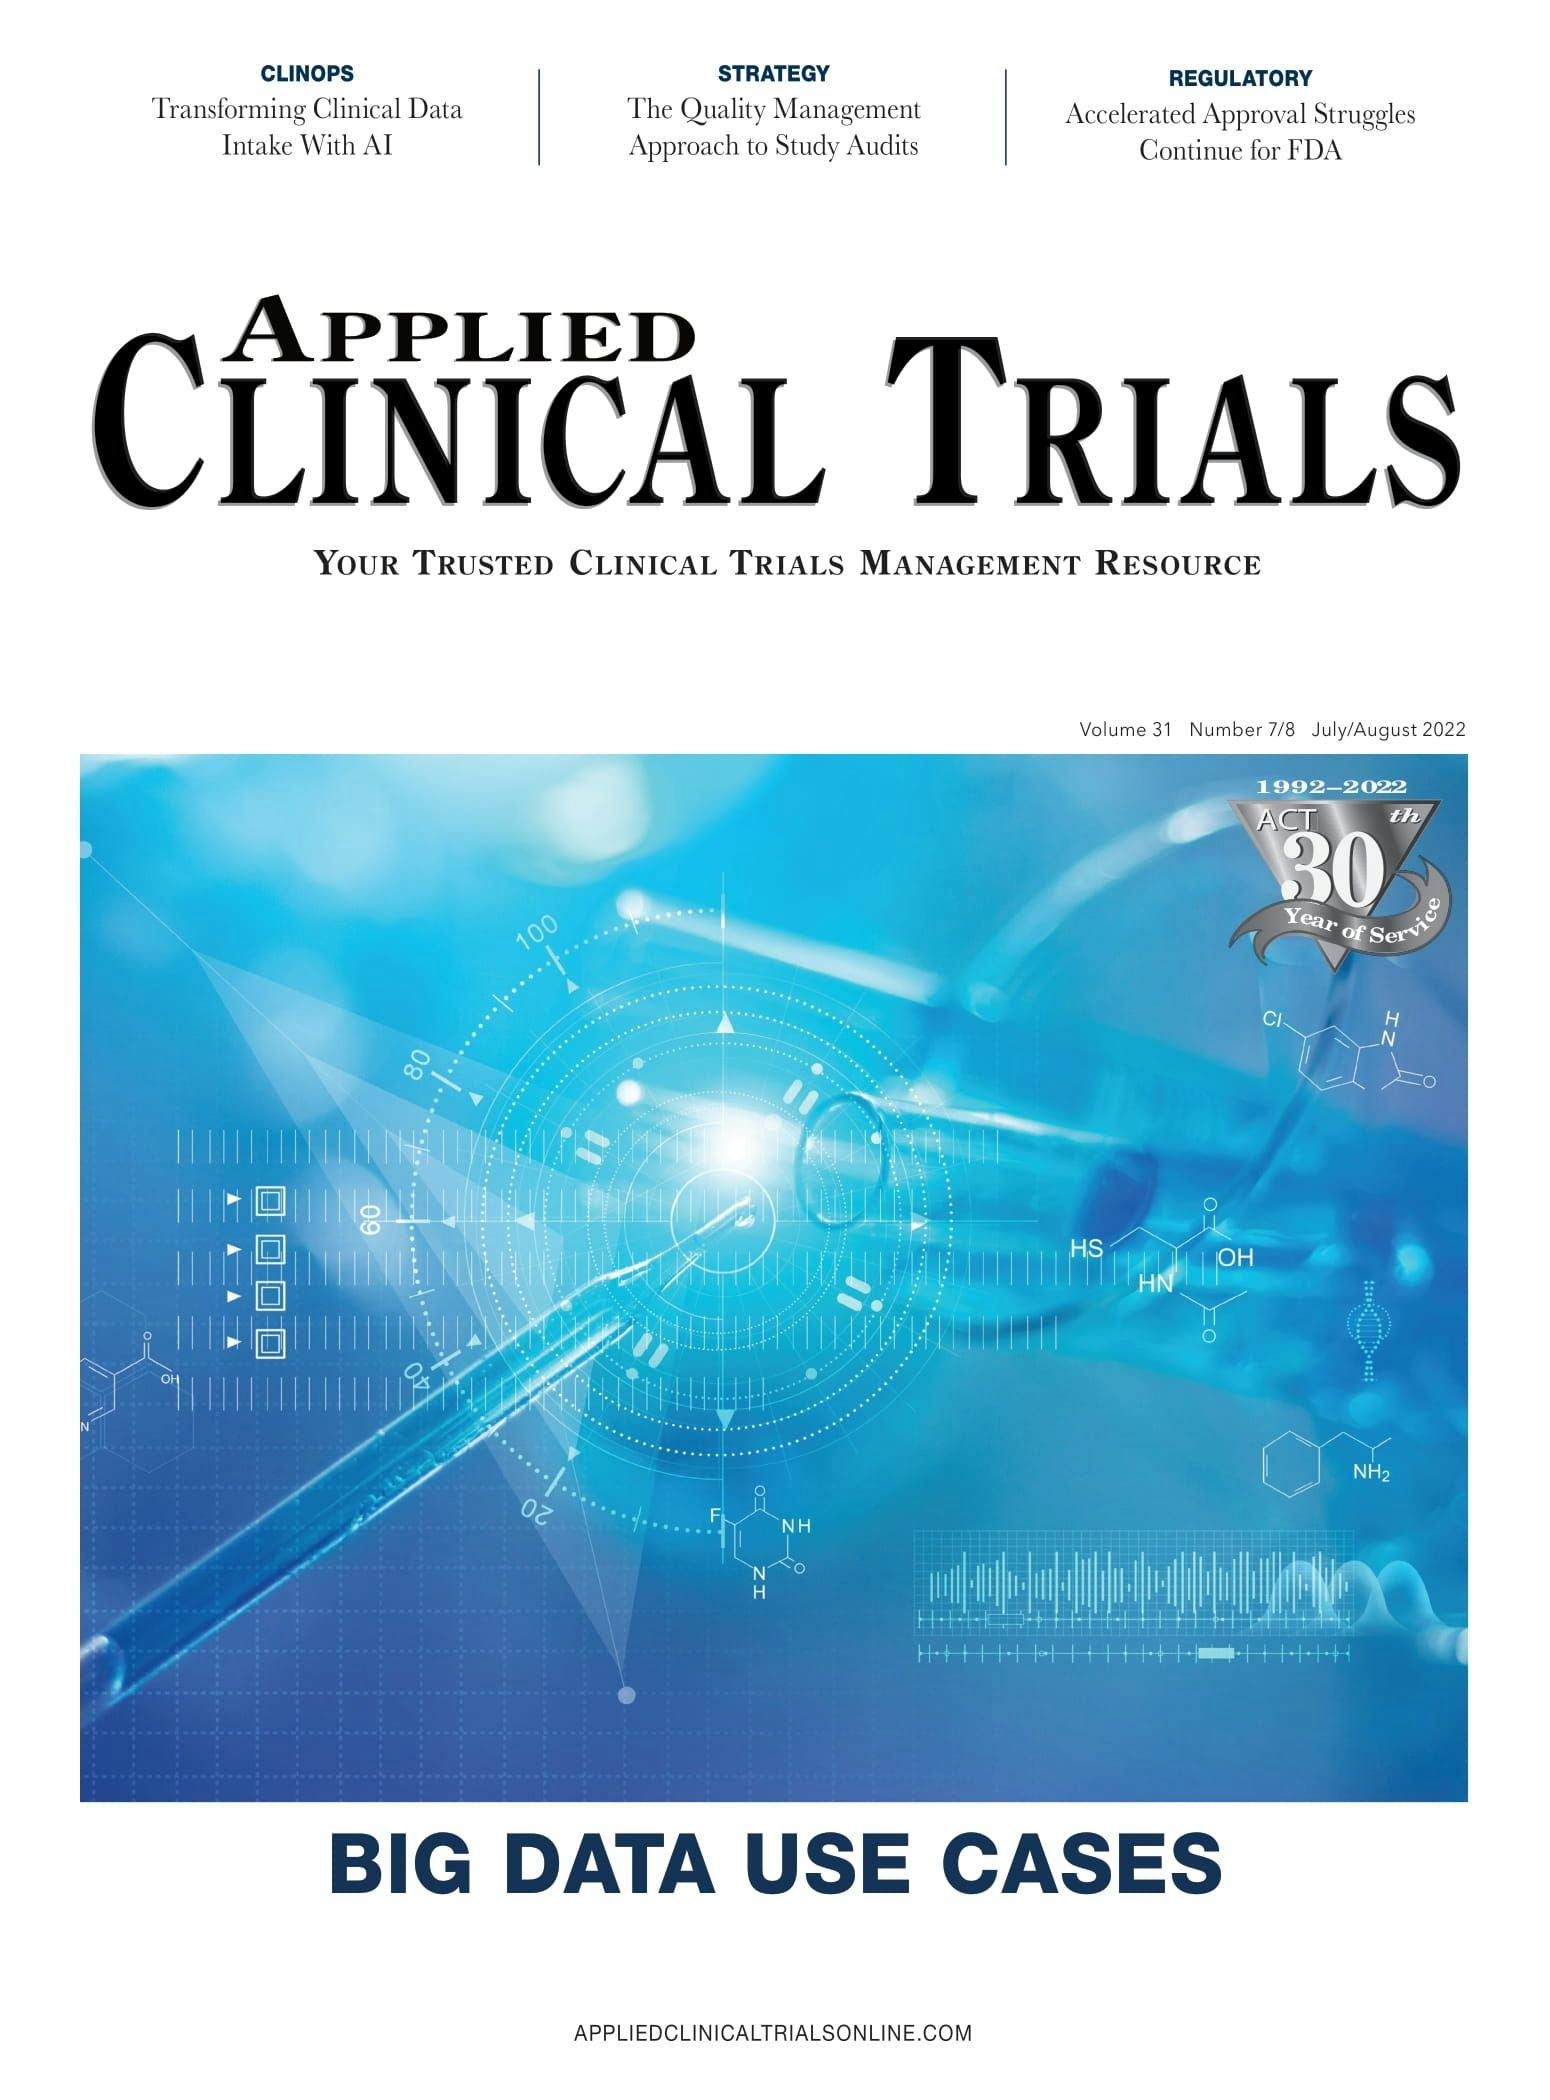 Applied Clinical Trials-08-01-2022